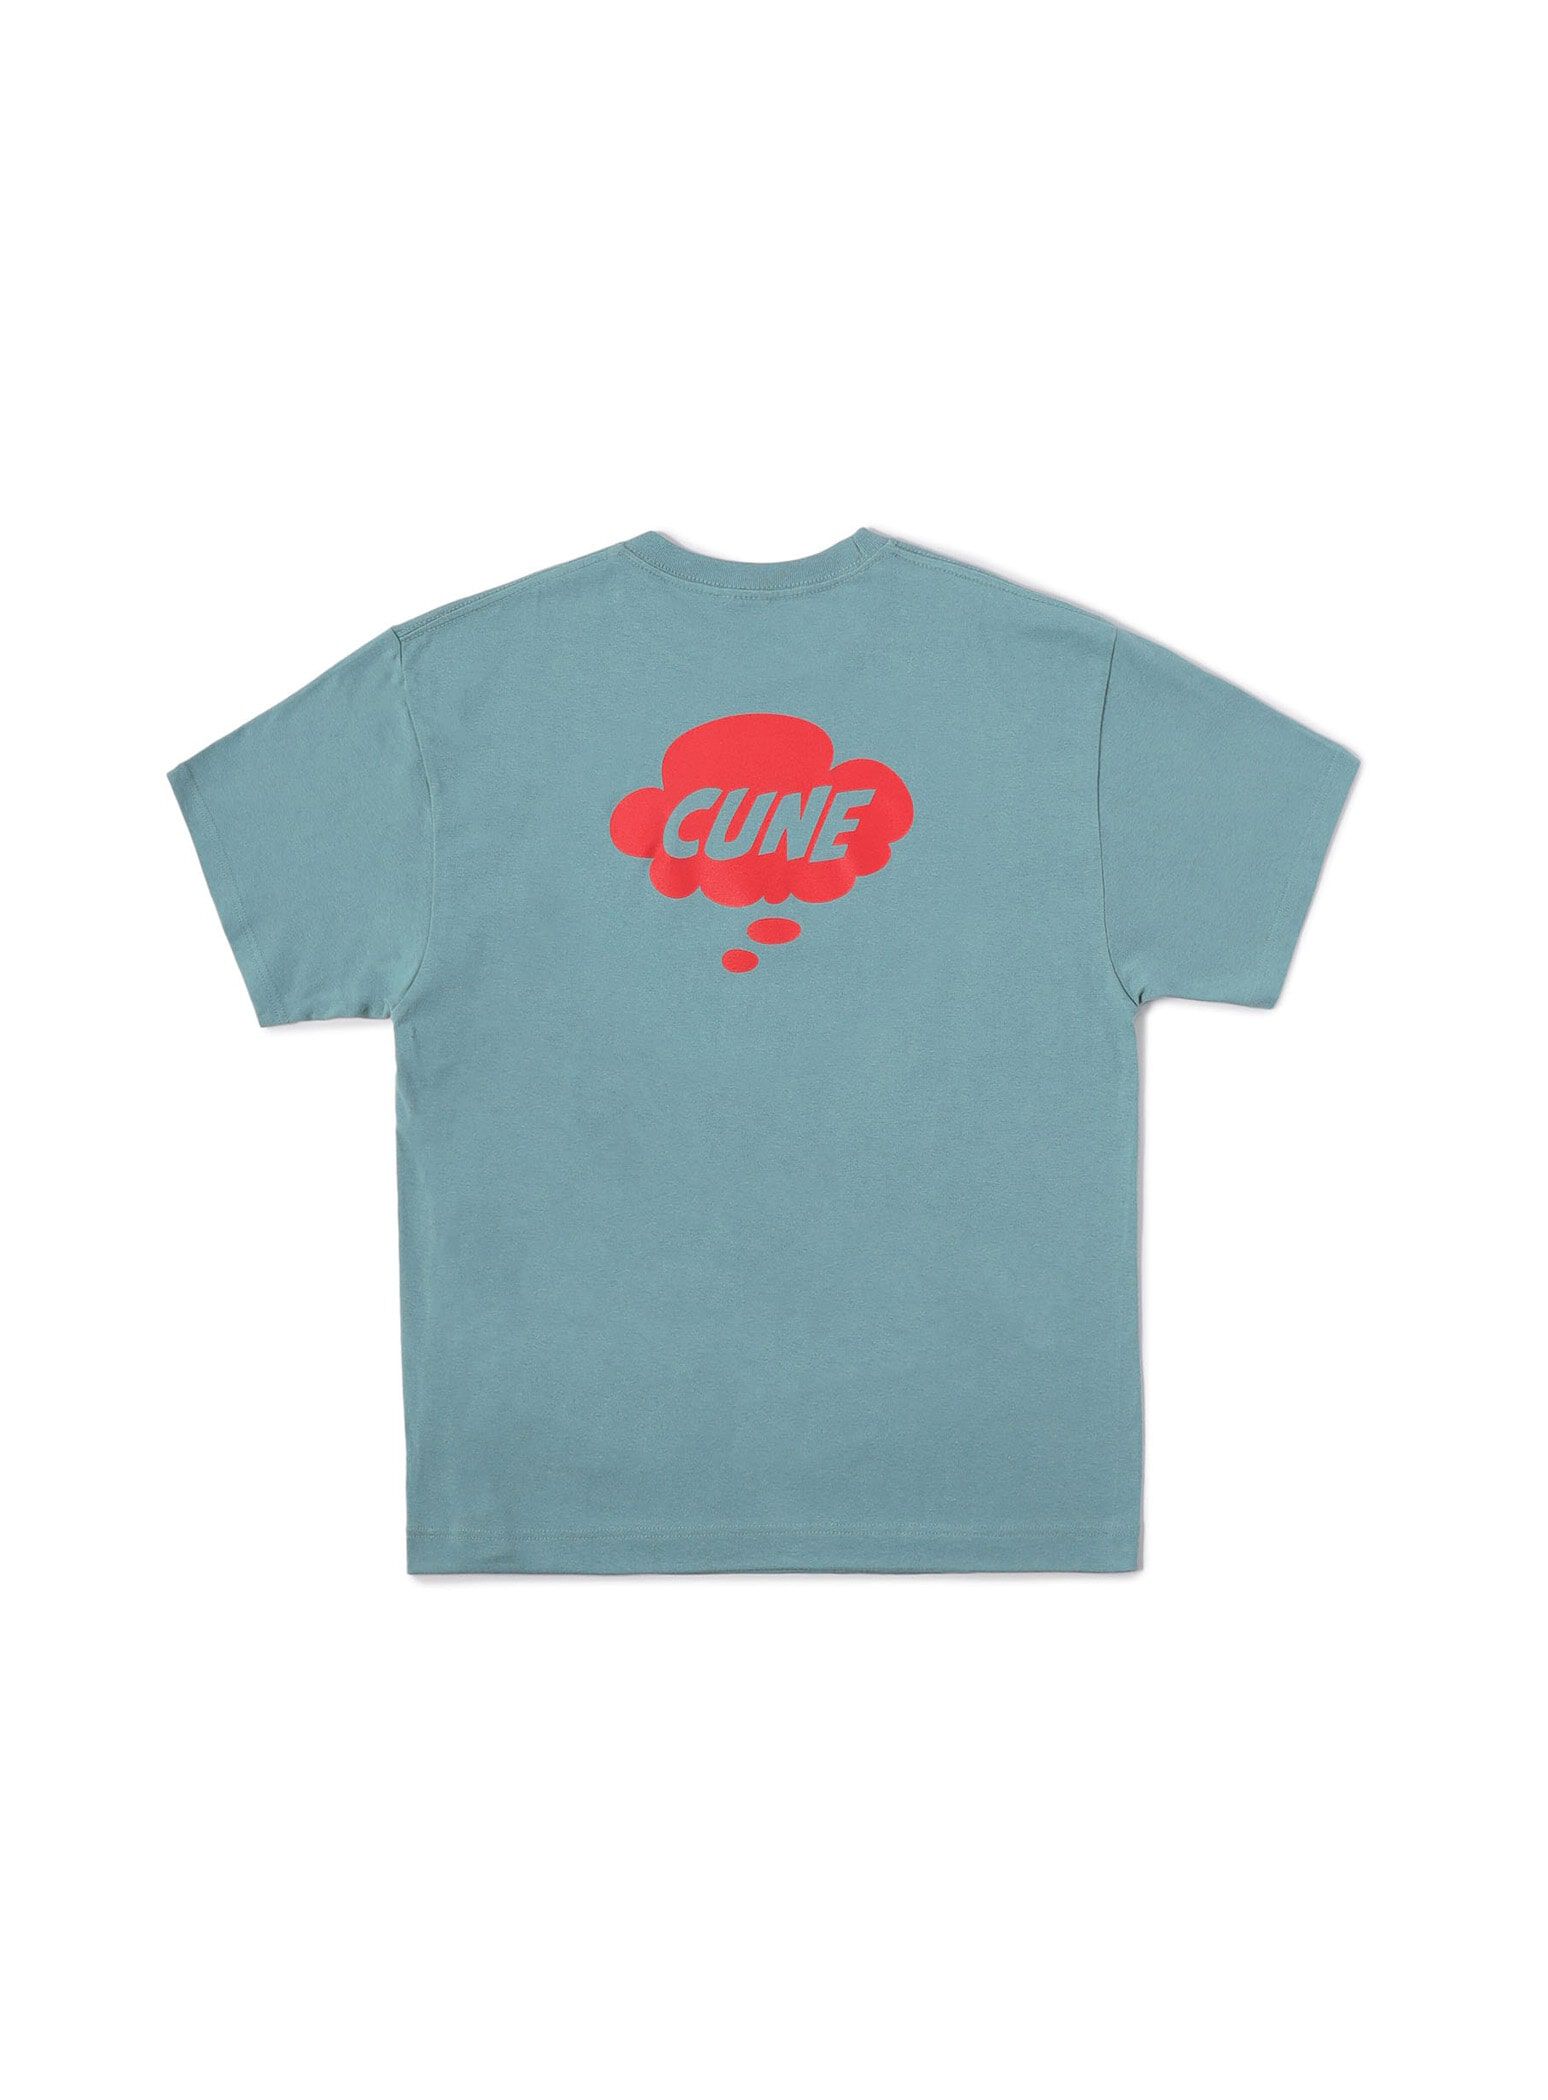 CUNE T-SHIRTS | CUNE Official Global Online Store